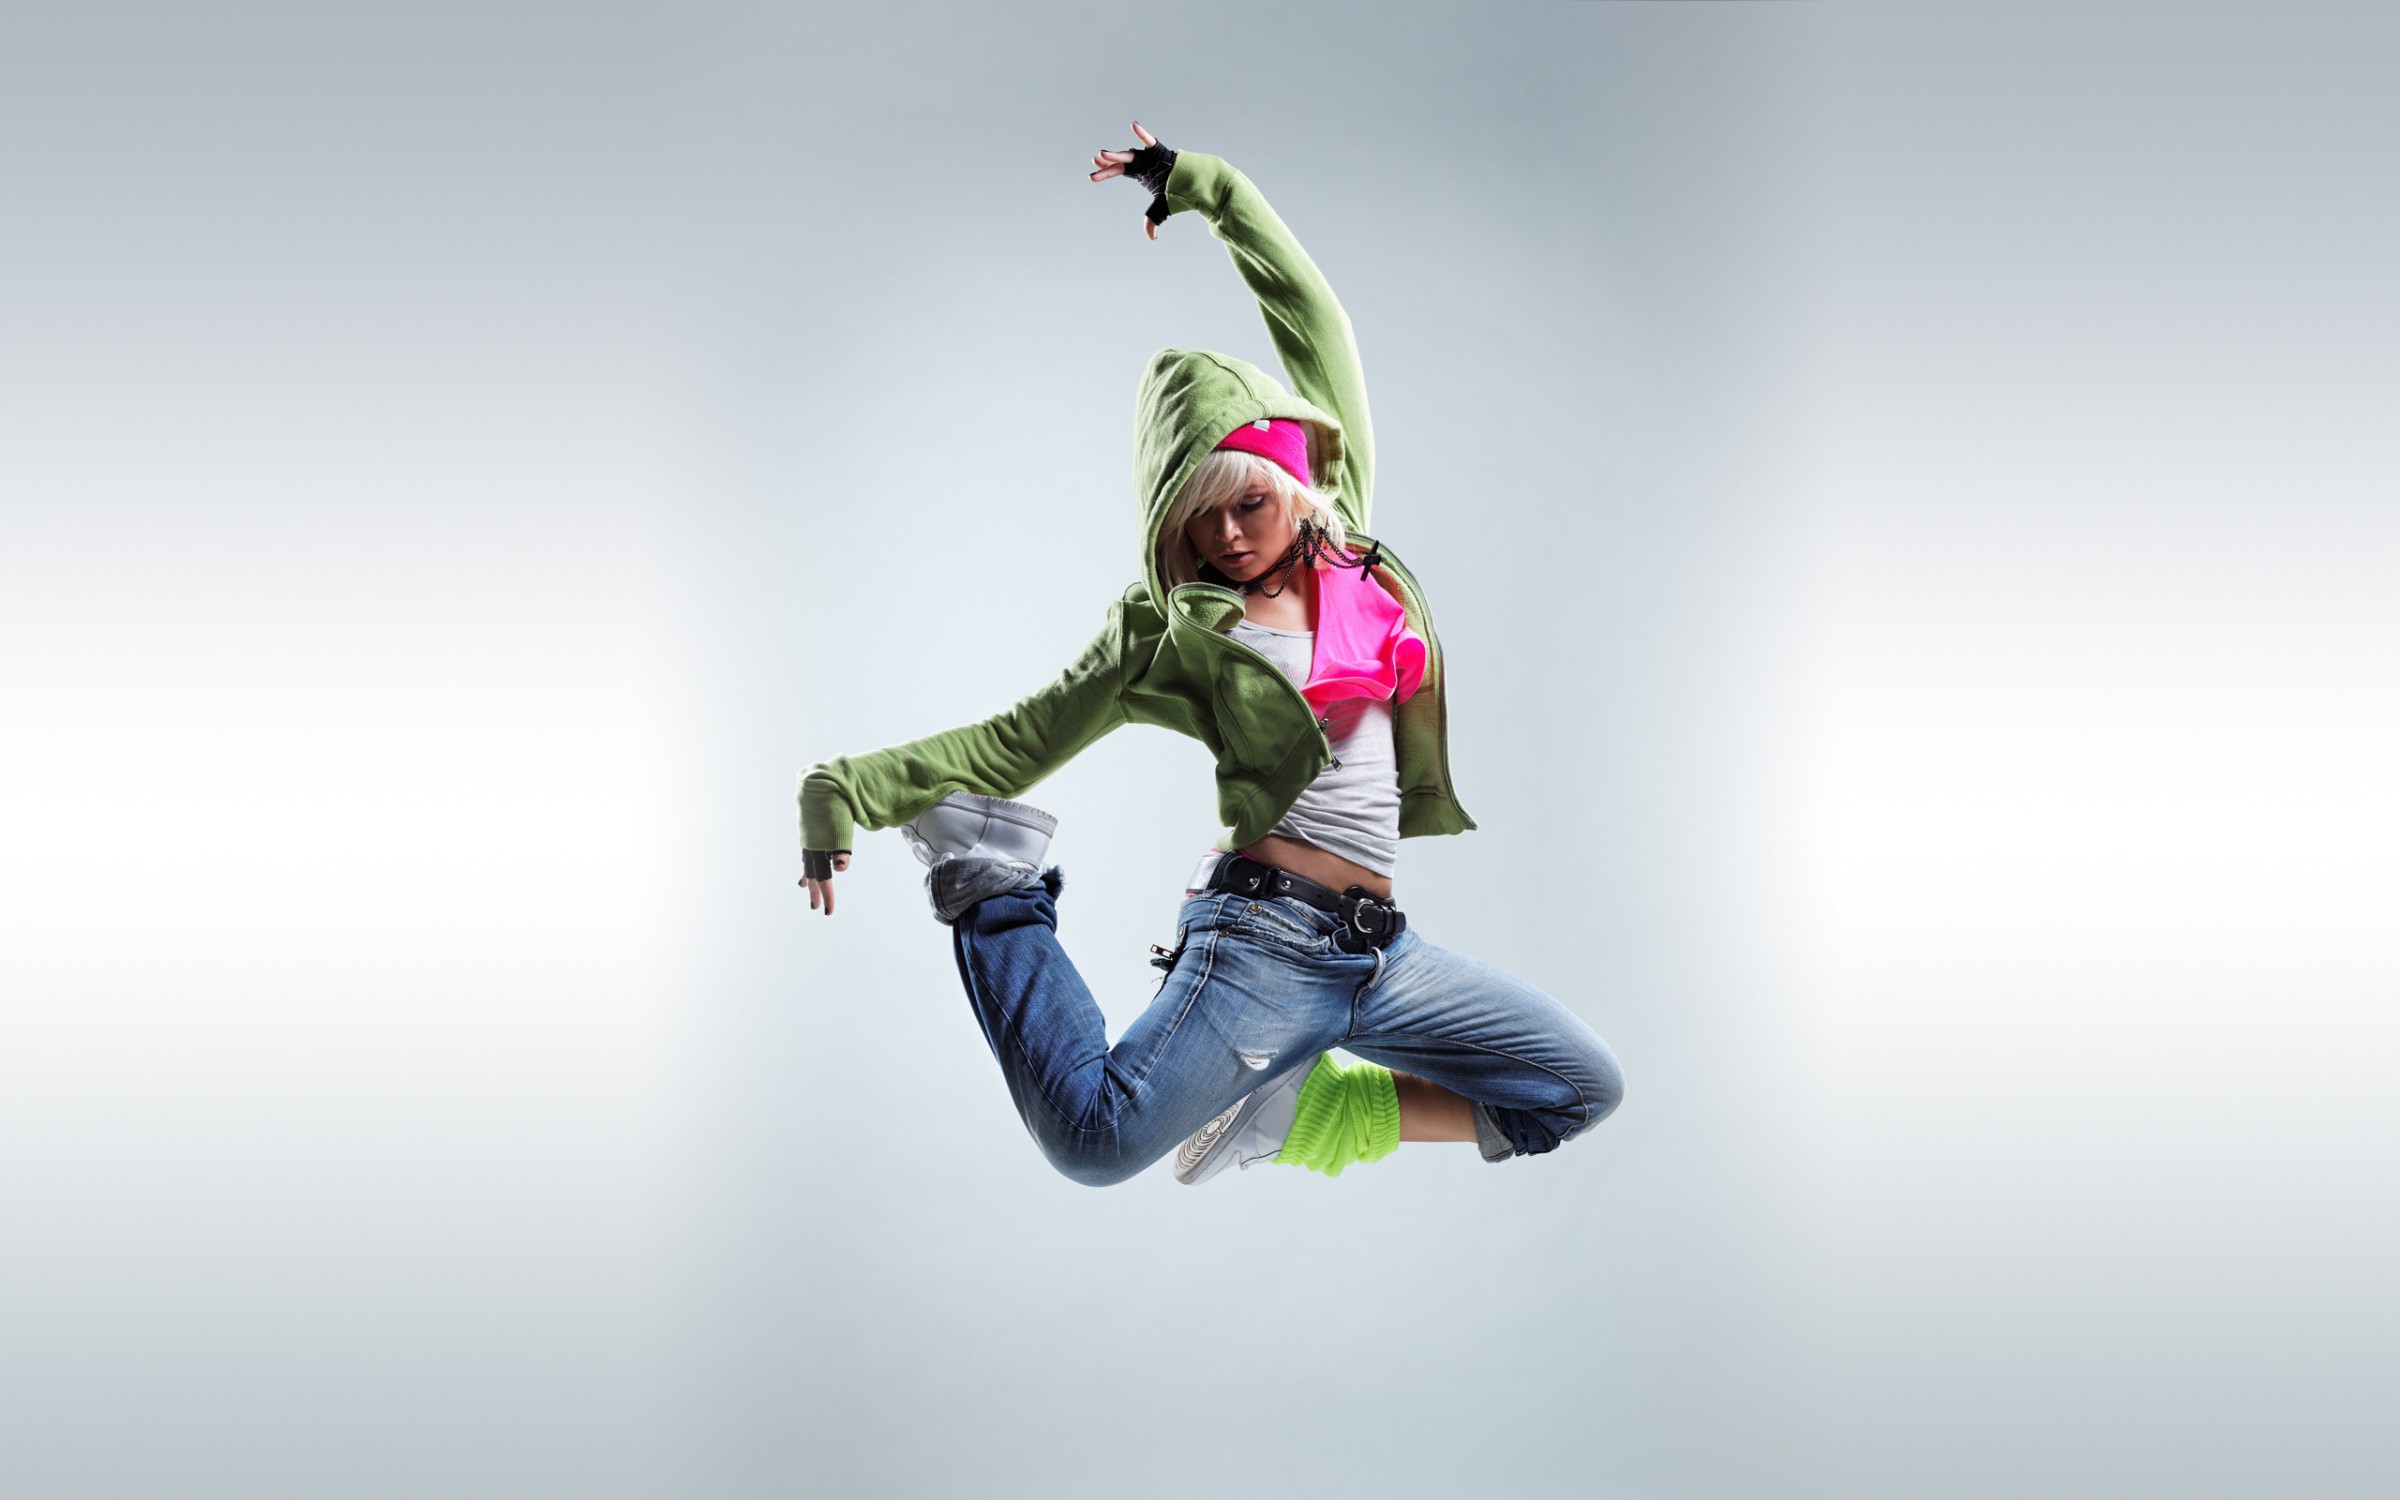 dancing jump for girls free awesome image for mobile